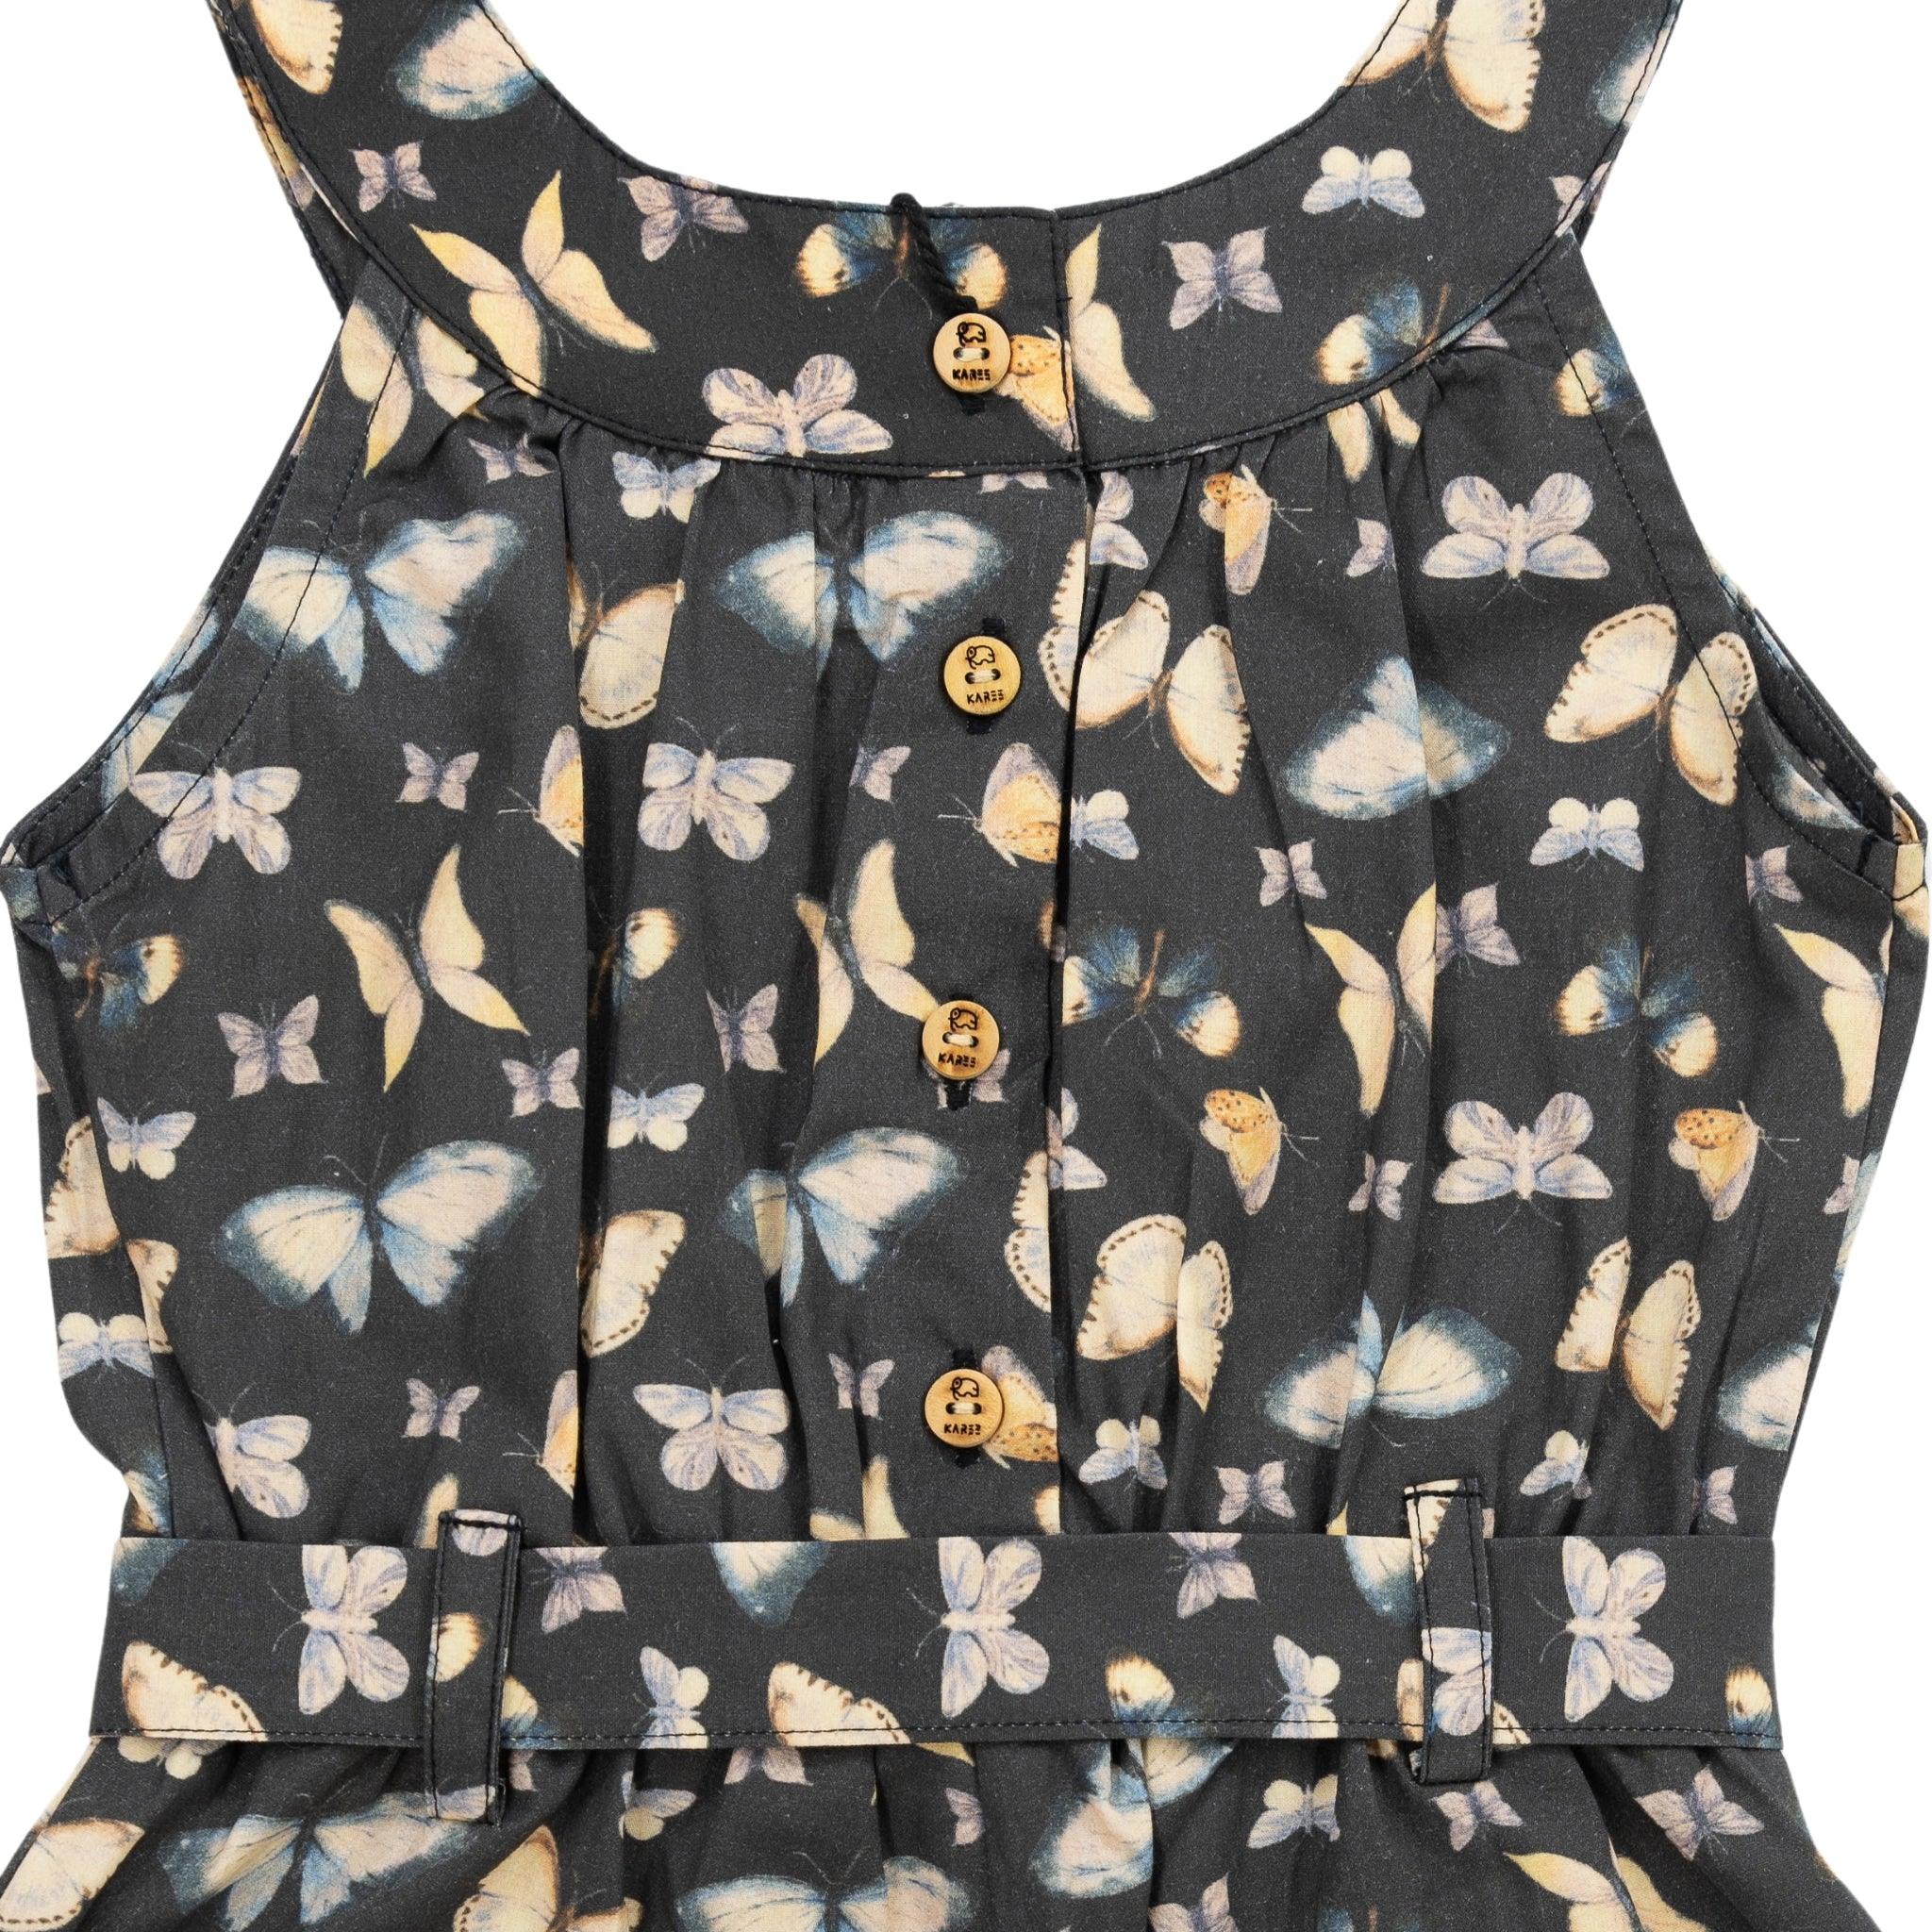 Close-up of a Pirate Black Adventure-ready Cotton Play Suit by Karee, featuring a butterfly print, pleats, button details, and a waist belt.